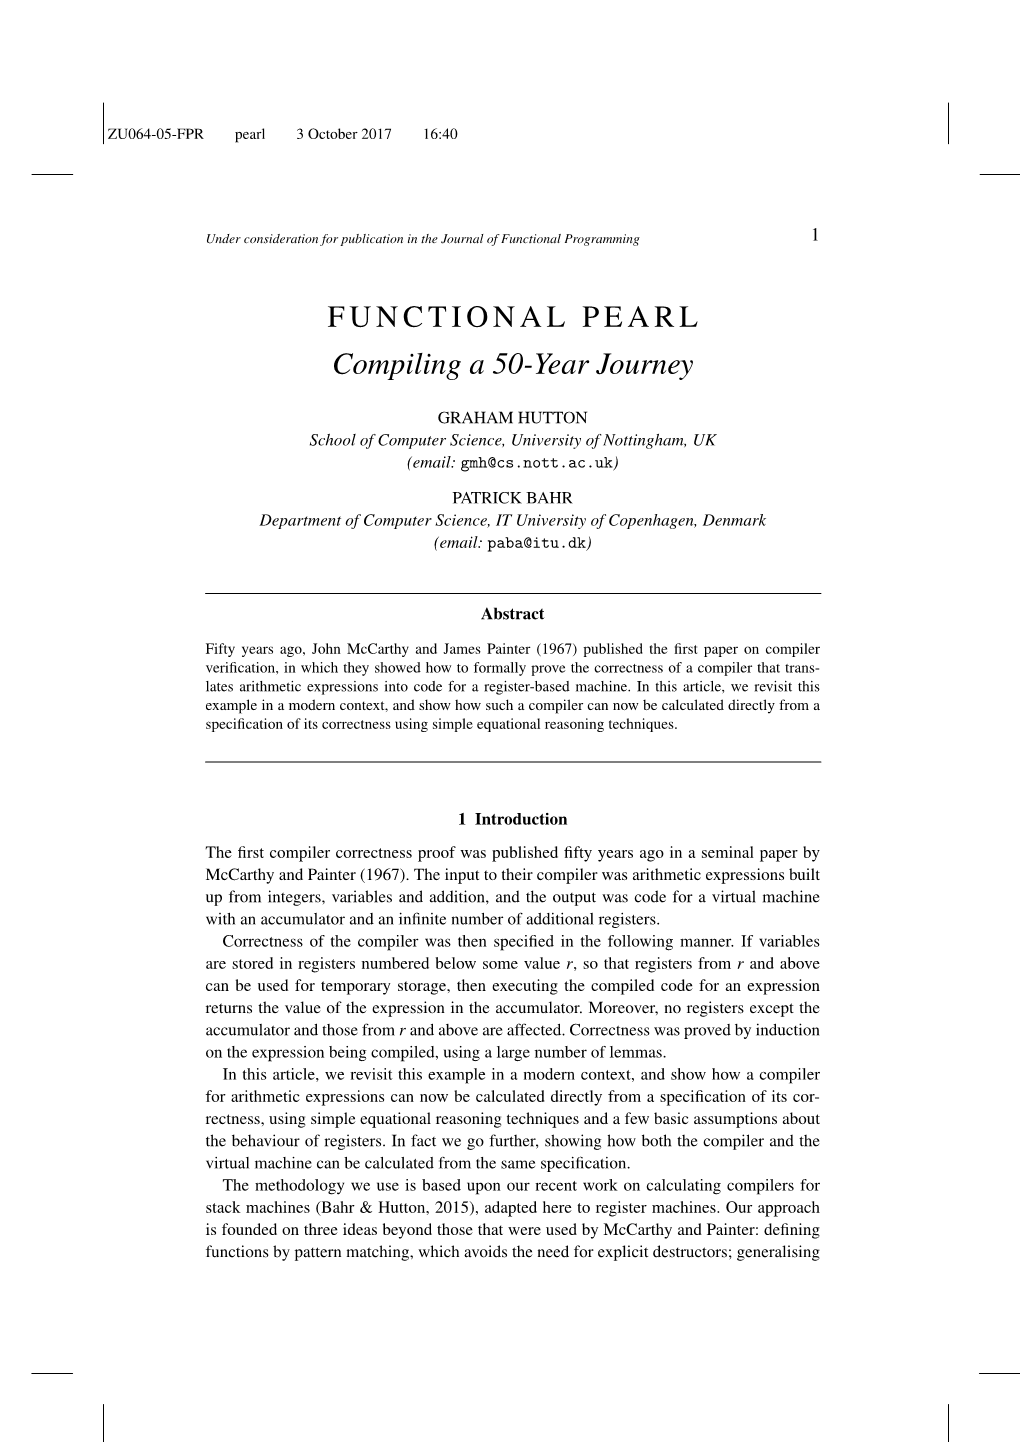 FUNCTIONAL PEARL Compiling a 50-Year Journey